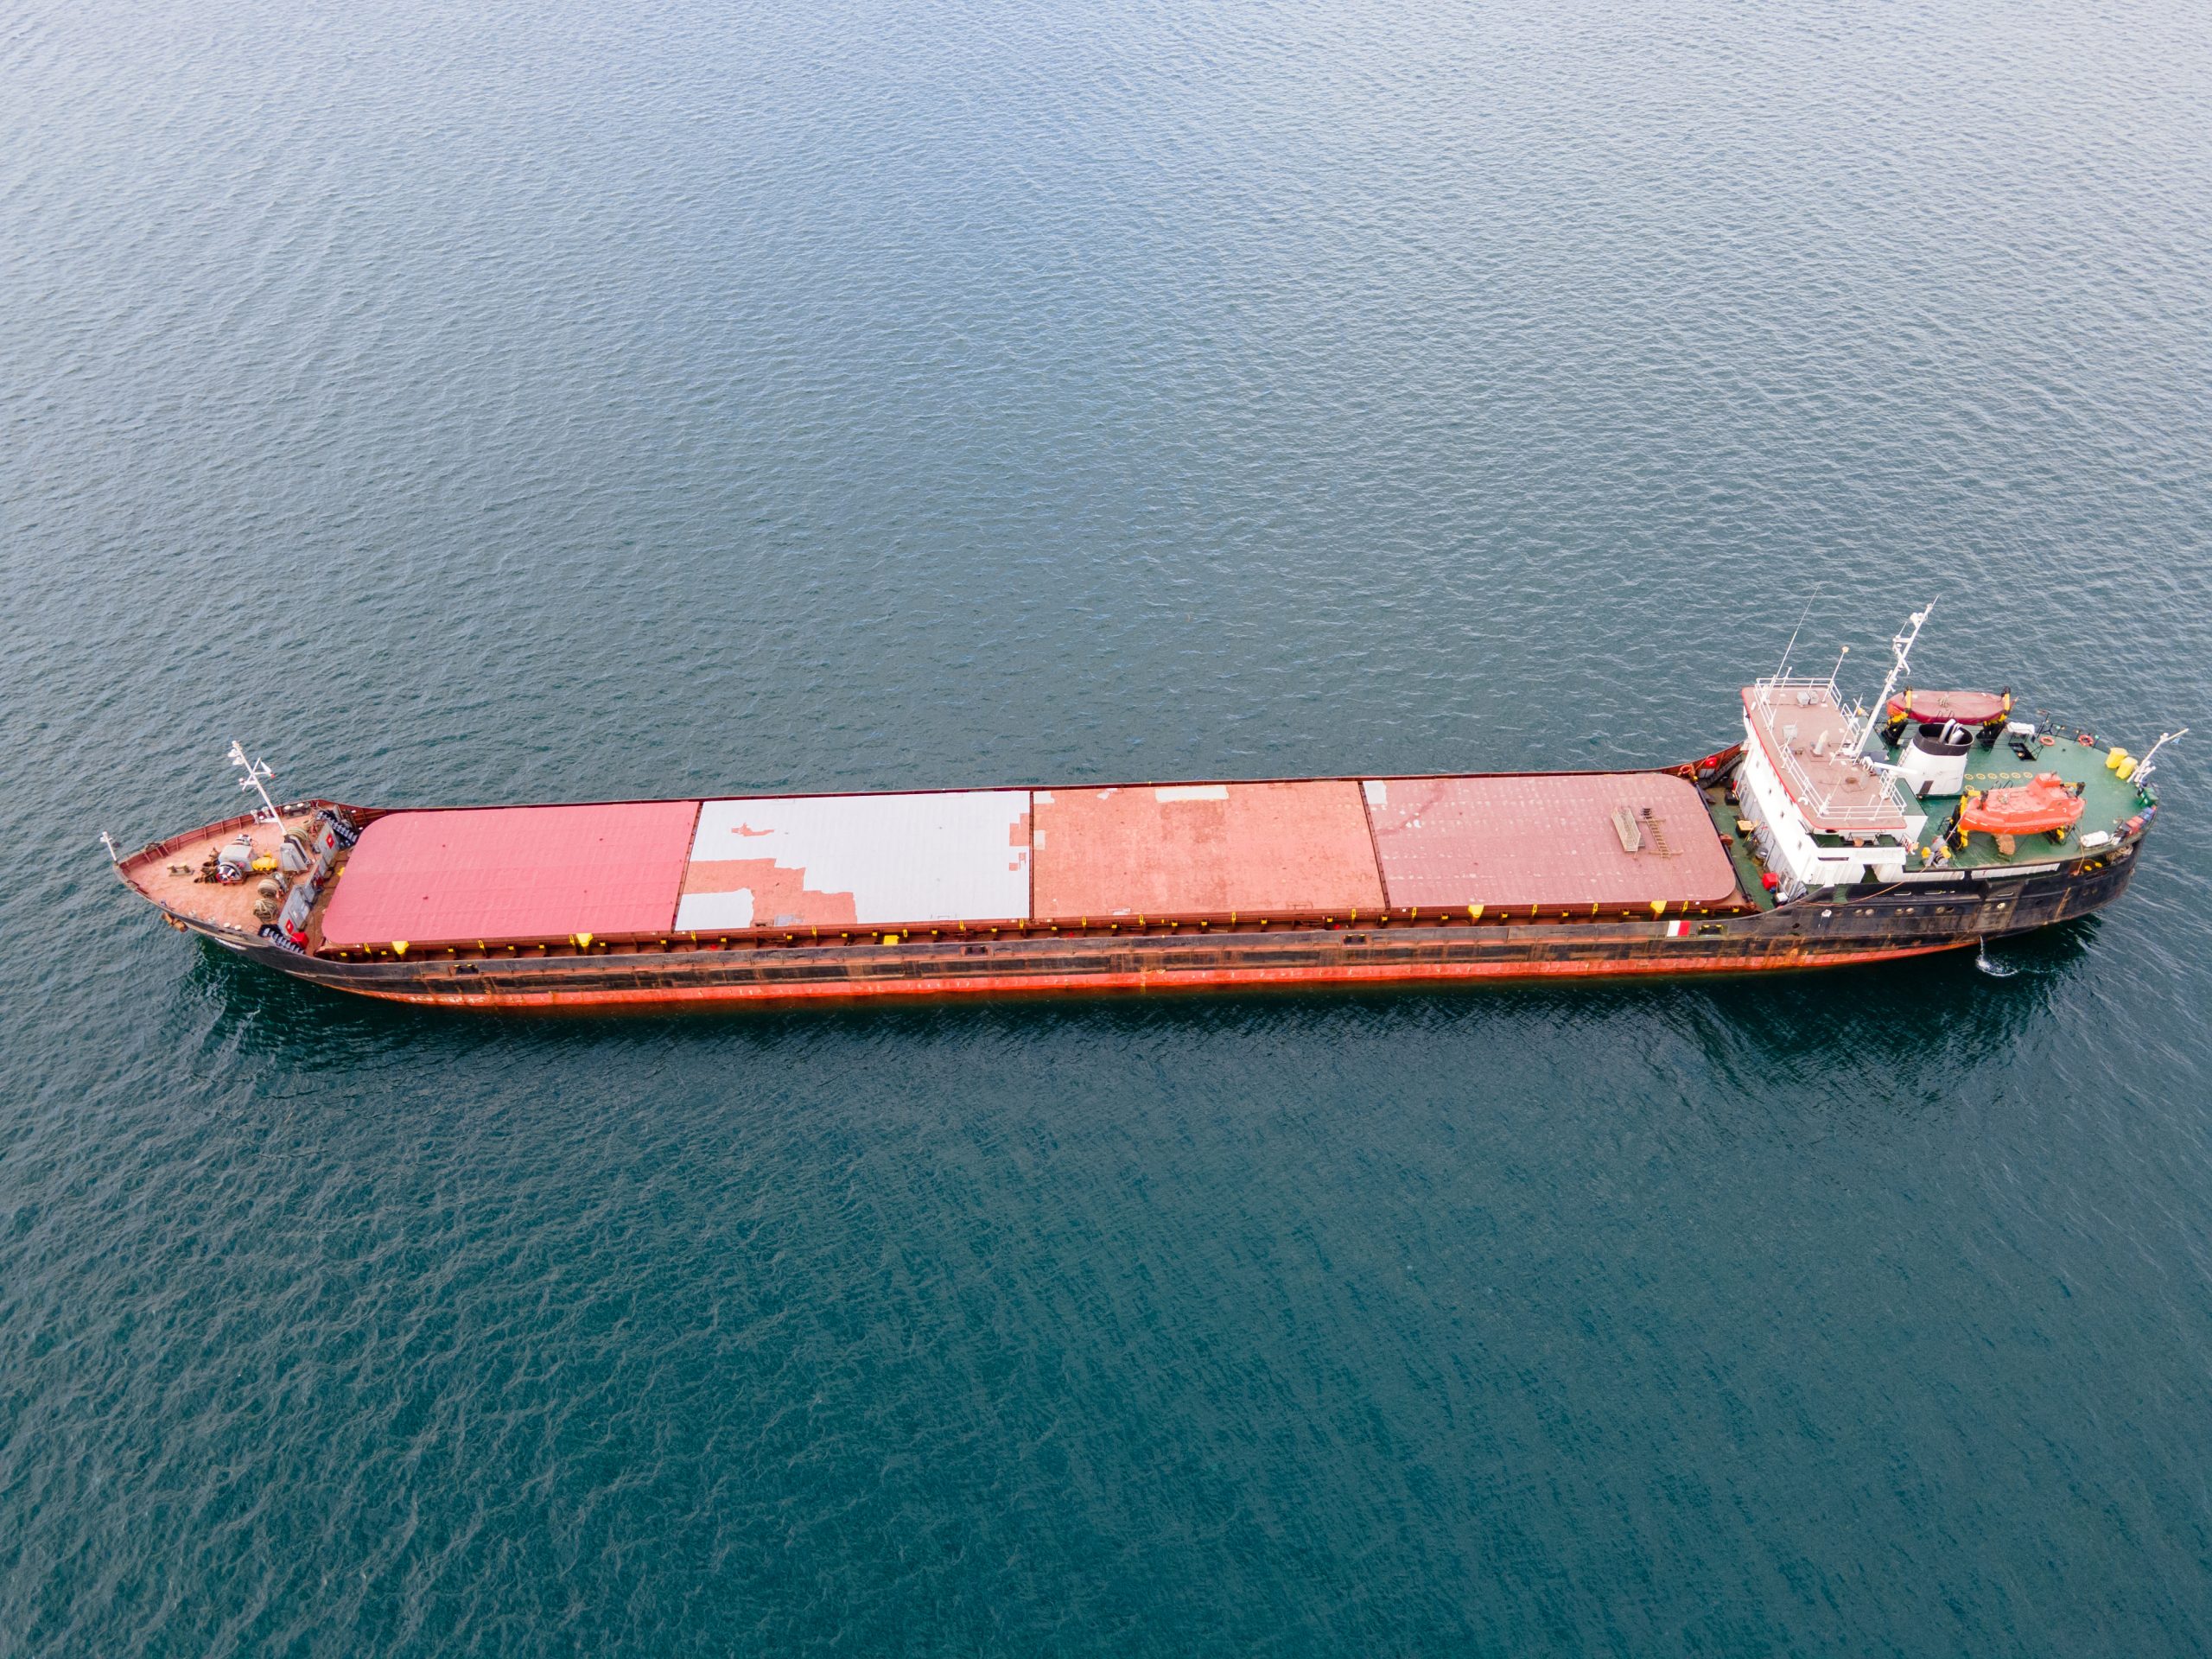 Global Chartering joins Sea Cargo Charter to promote shipping decarbonization